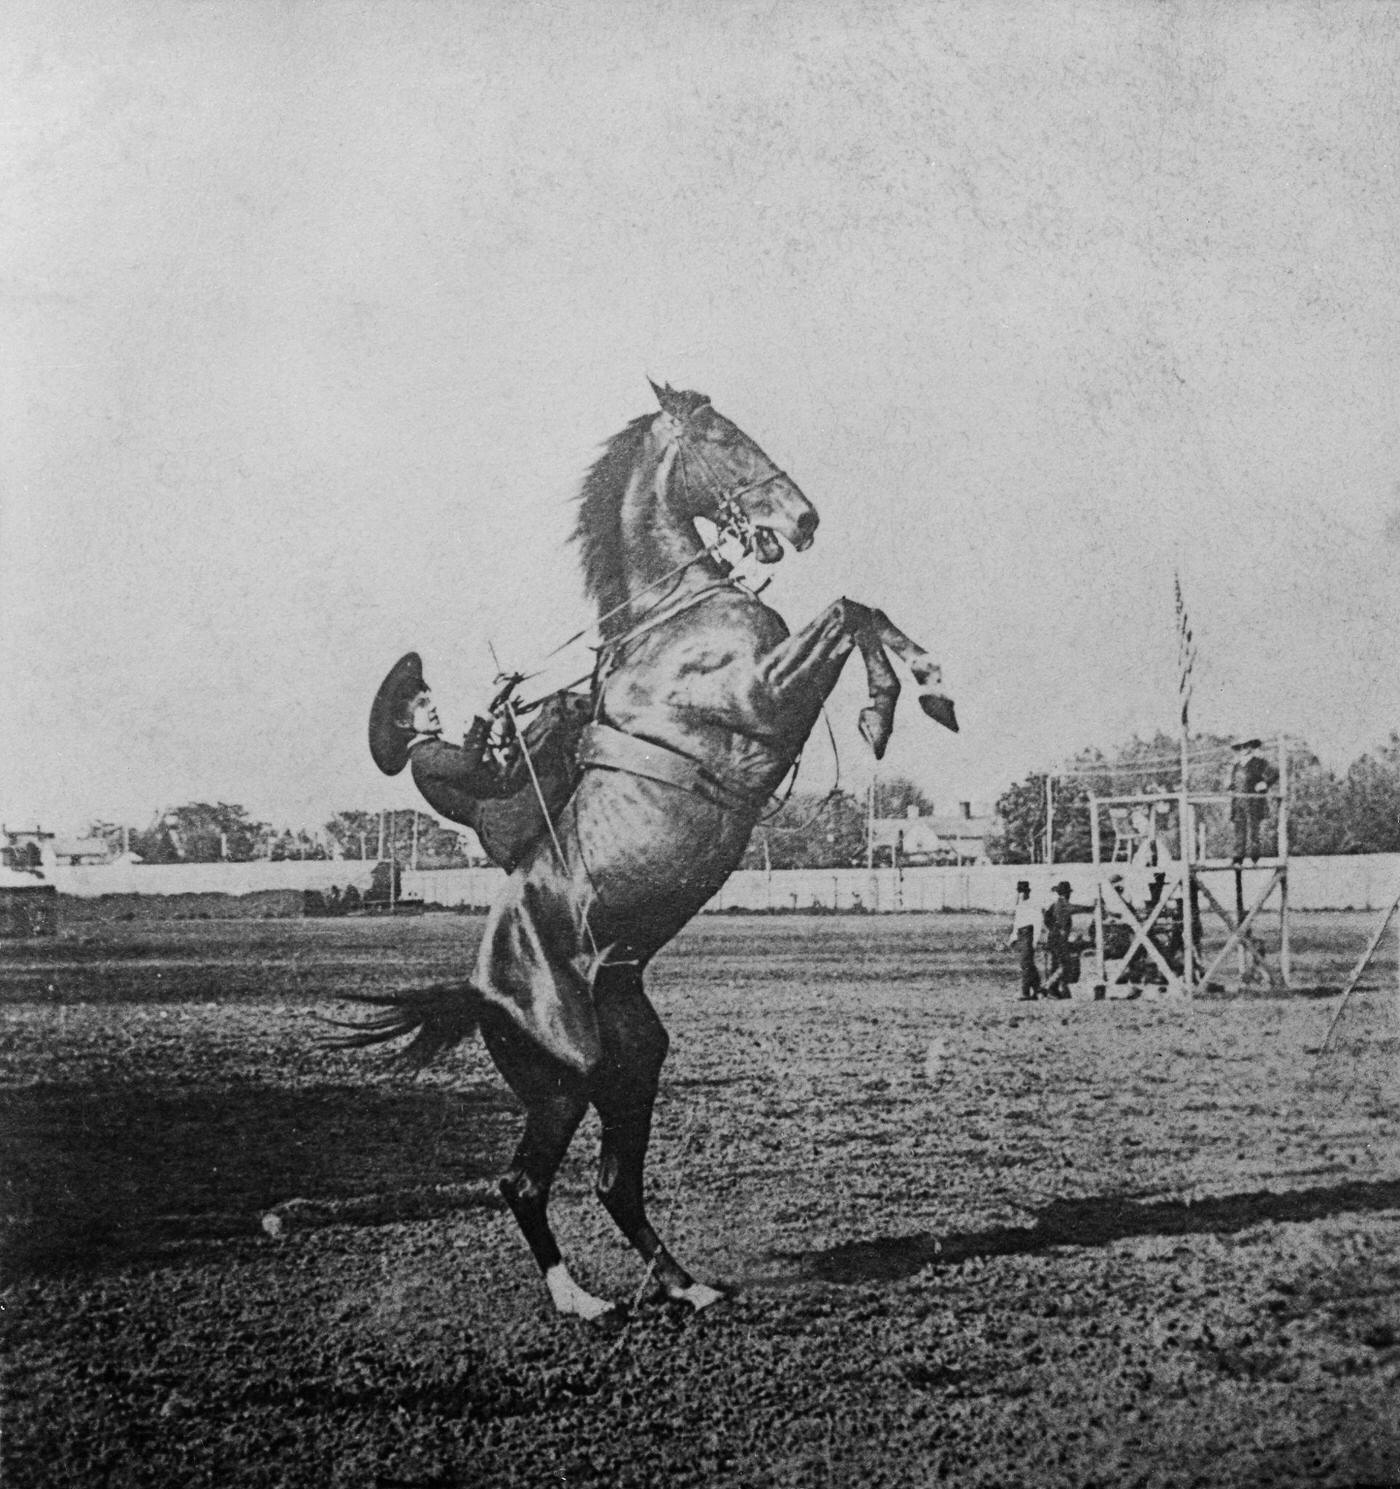 Miss Hickok, Champion Equestrienne of the World, 1889: Emma Lake, the daughter of Agnes Thatcher Lake who married Wild Bill Hickok, the famed gunfighter and lawman of the American Old West, part of 'Buffalo Bill Cody's Wild West'